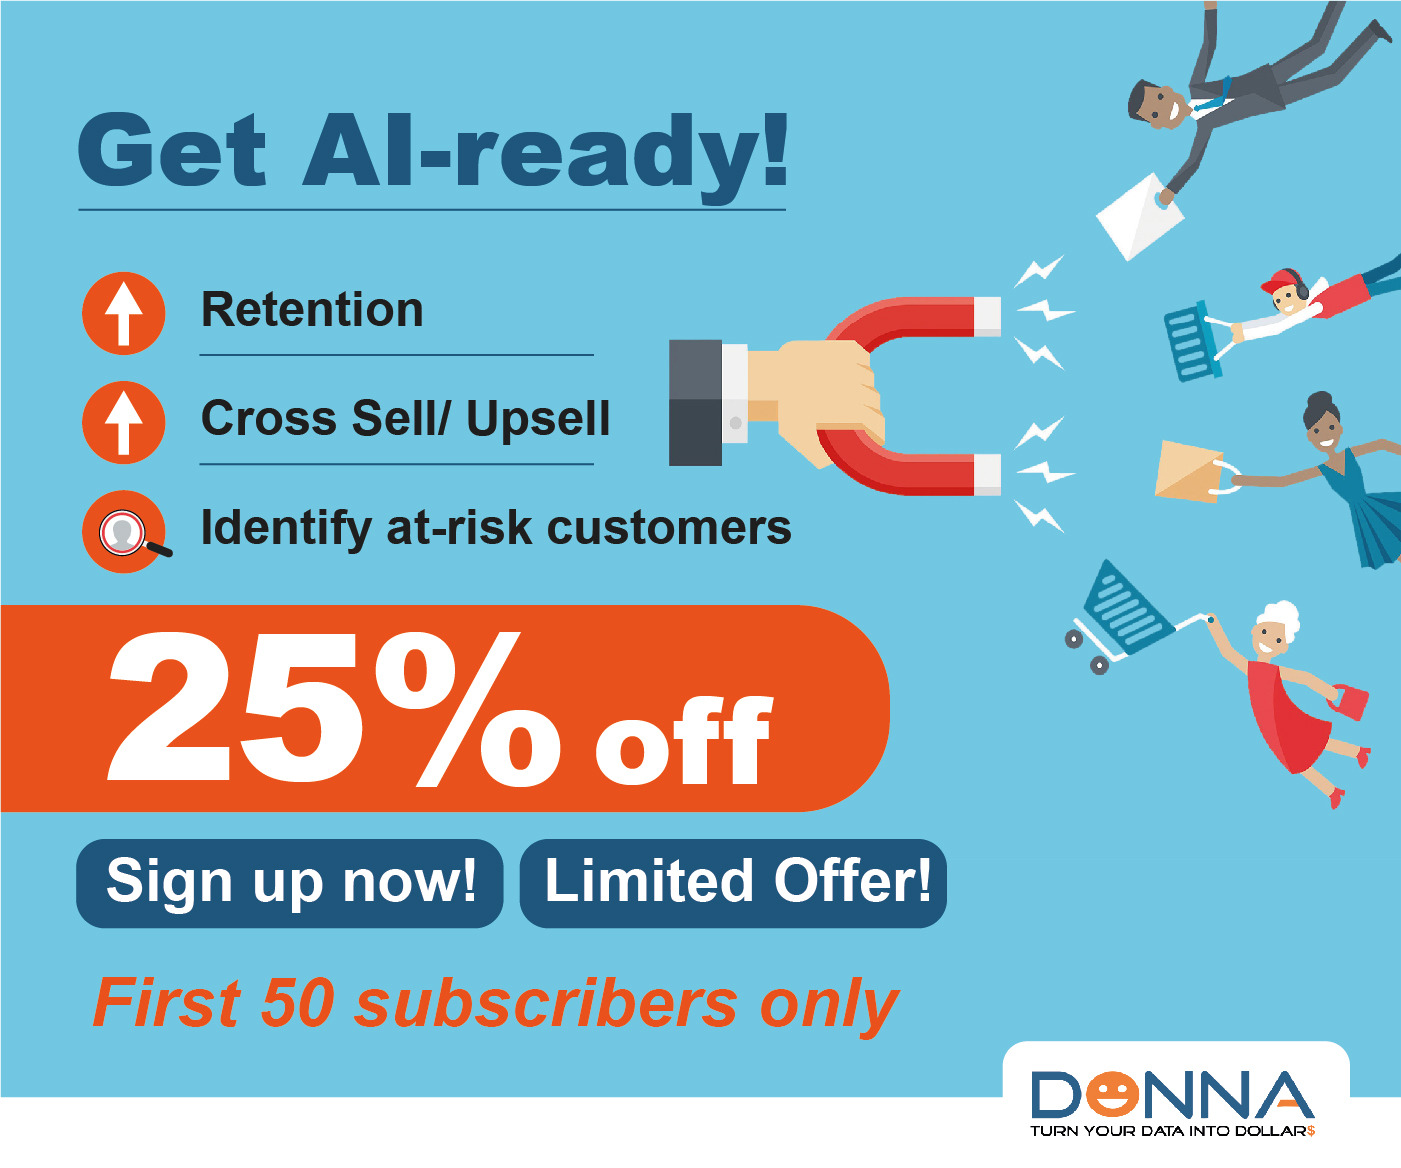 Get AI-ready with DONNA